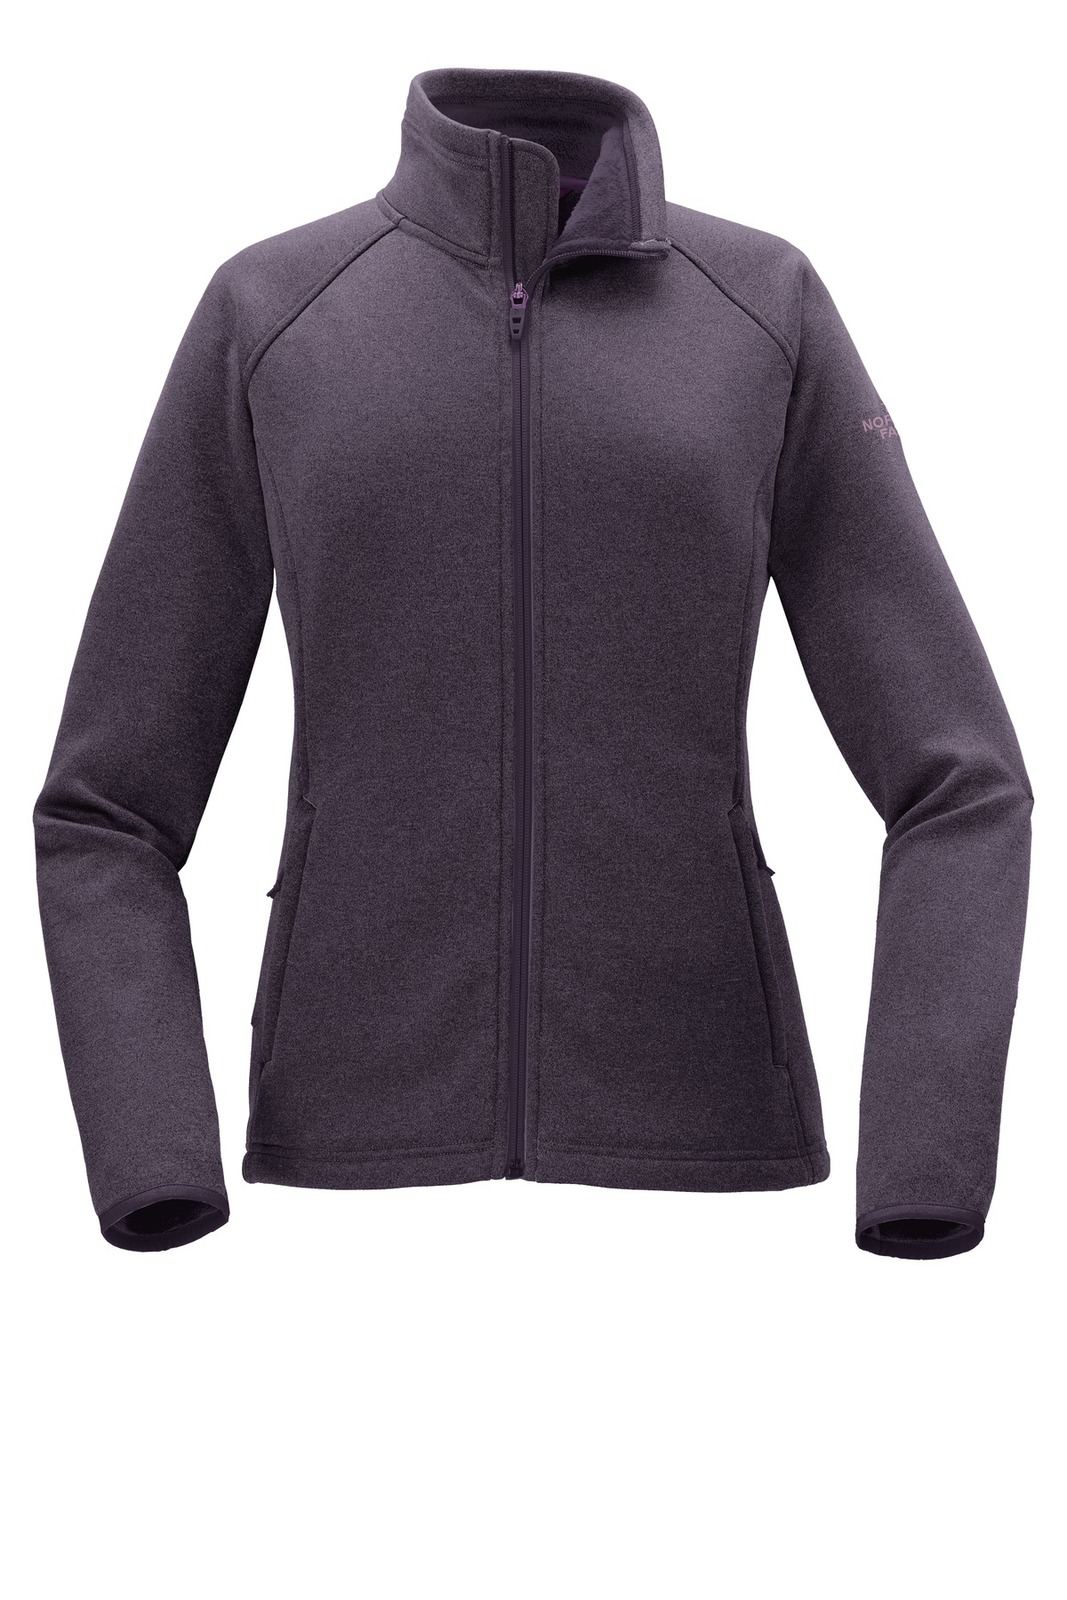 The North Face NF0A3LHA Ladies Canyon Flats Stretch Fleece Jacket2